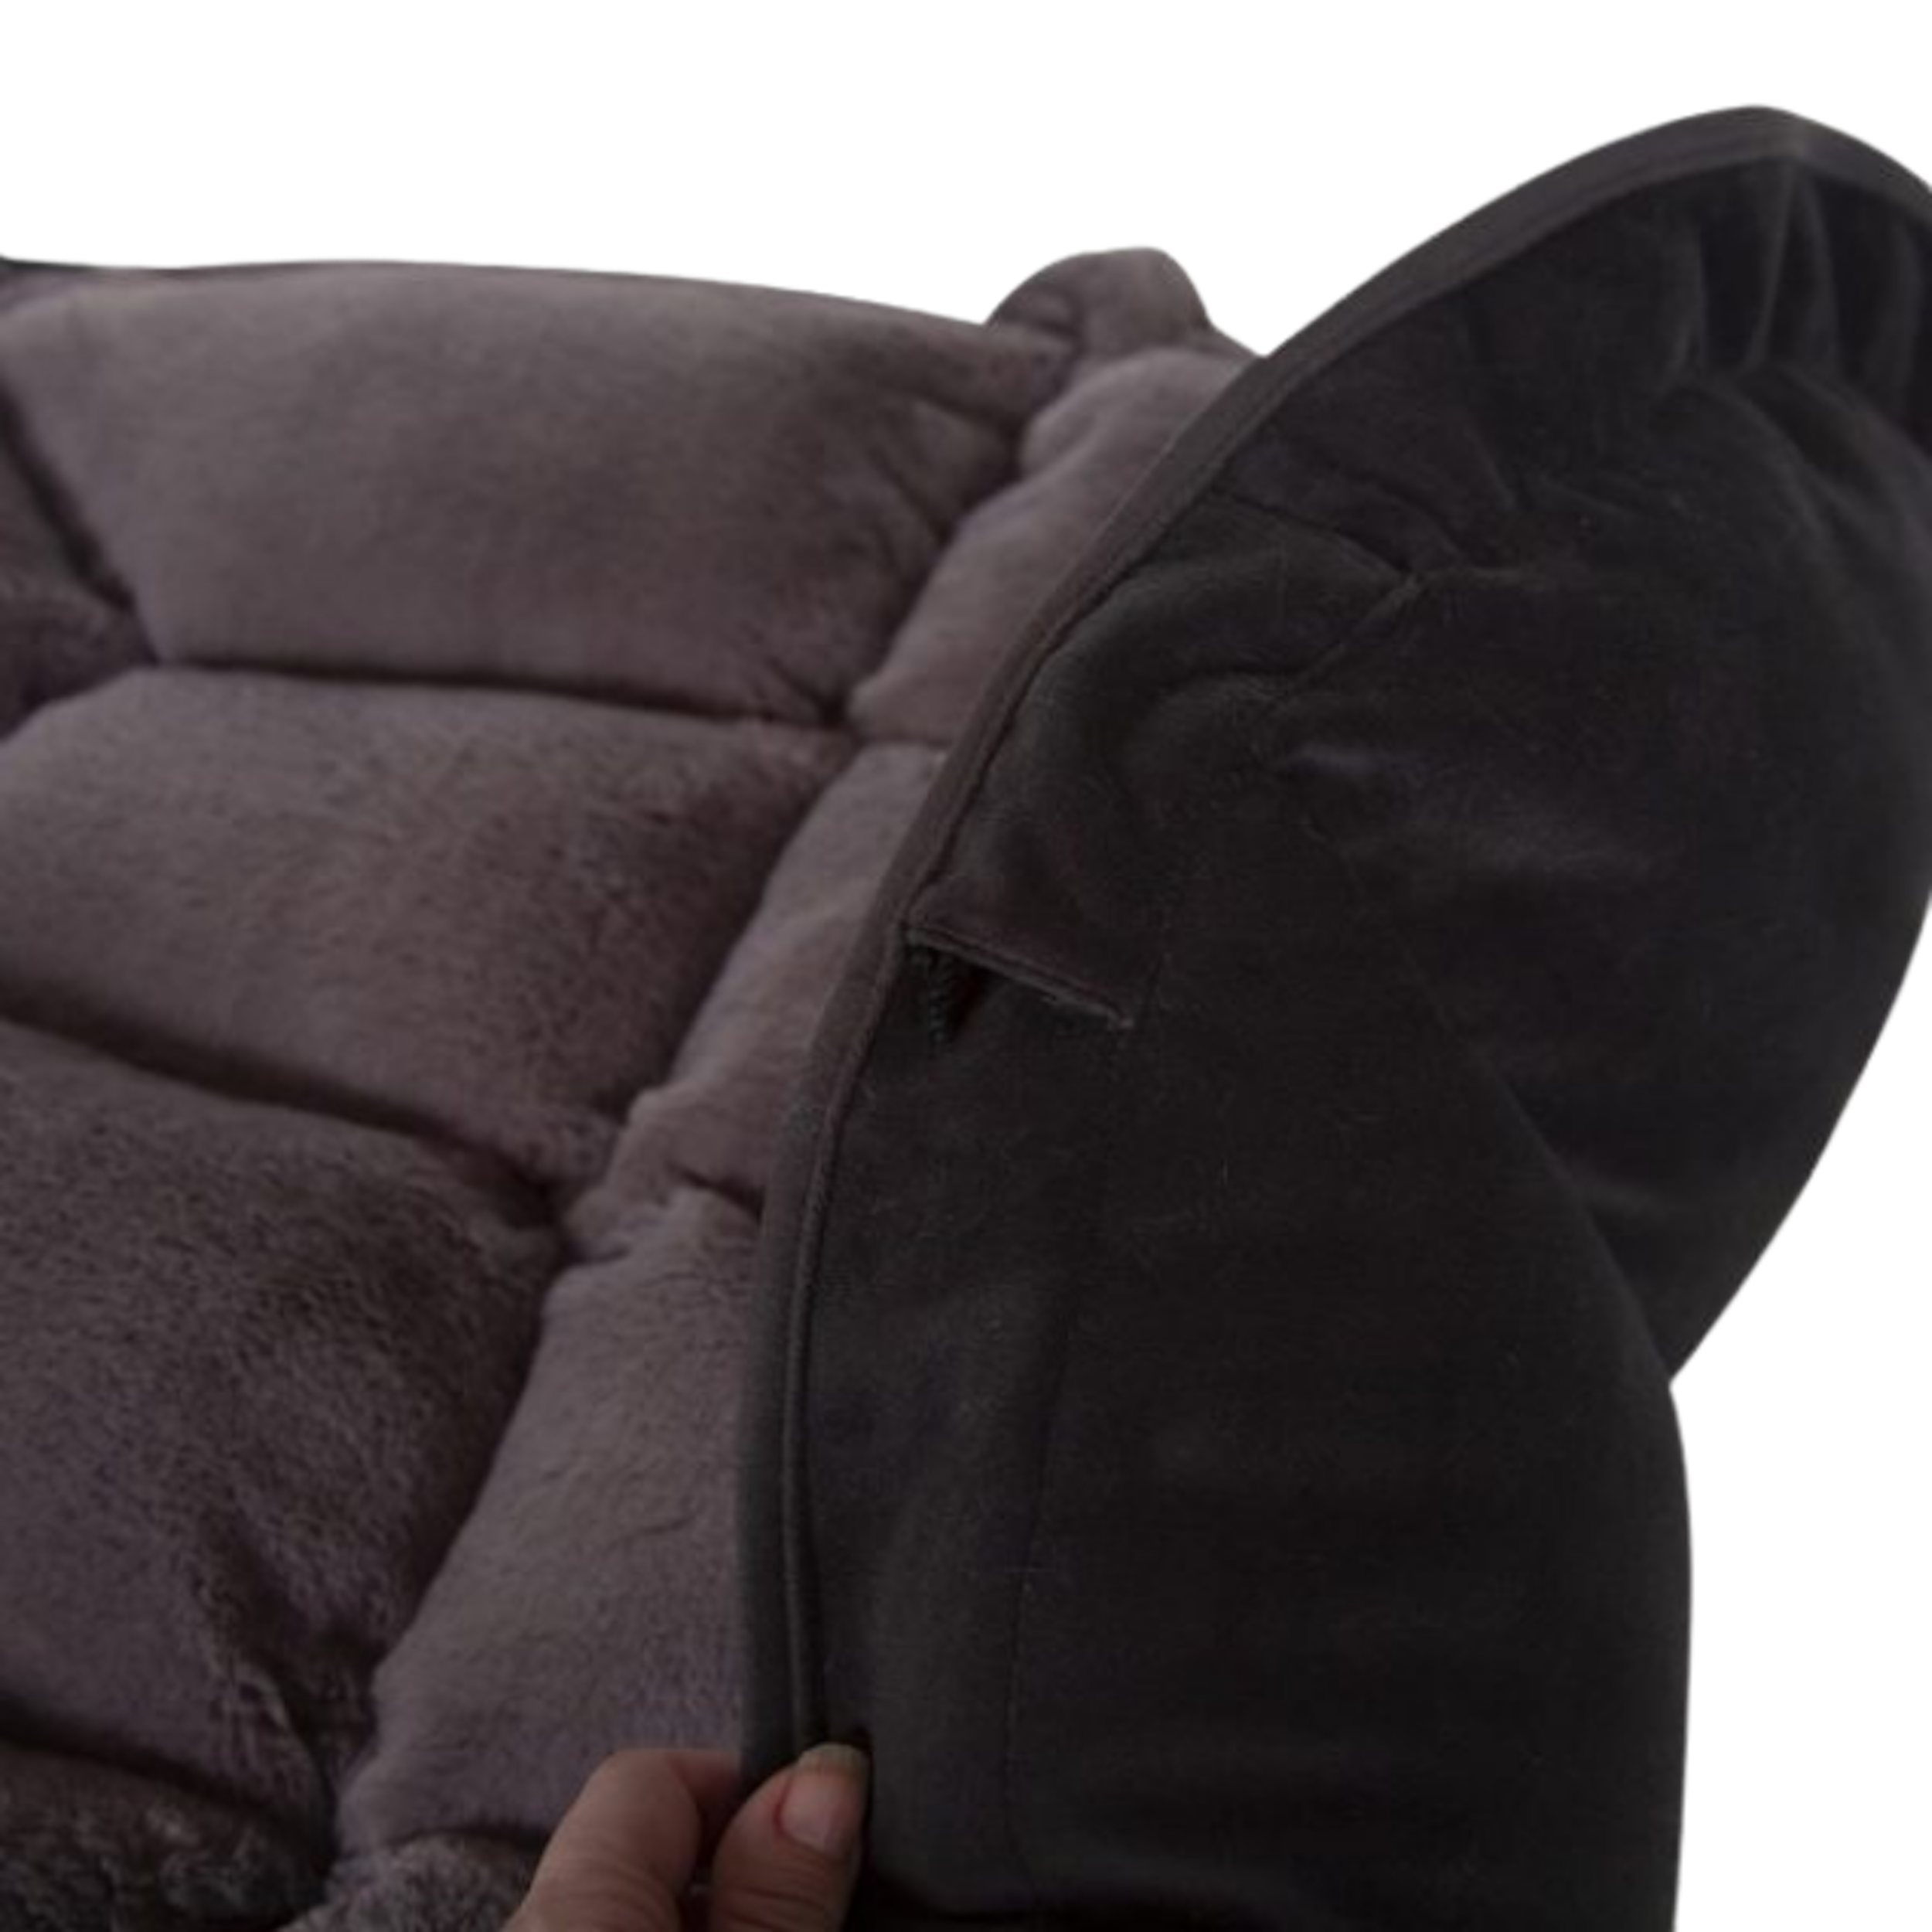 LILY-PAD-CUDDLE-BURROW-CHARCOAL-GRAY-DOG-BED